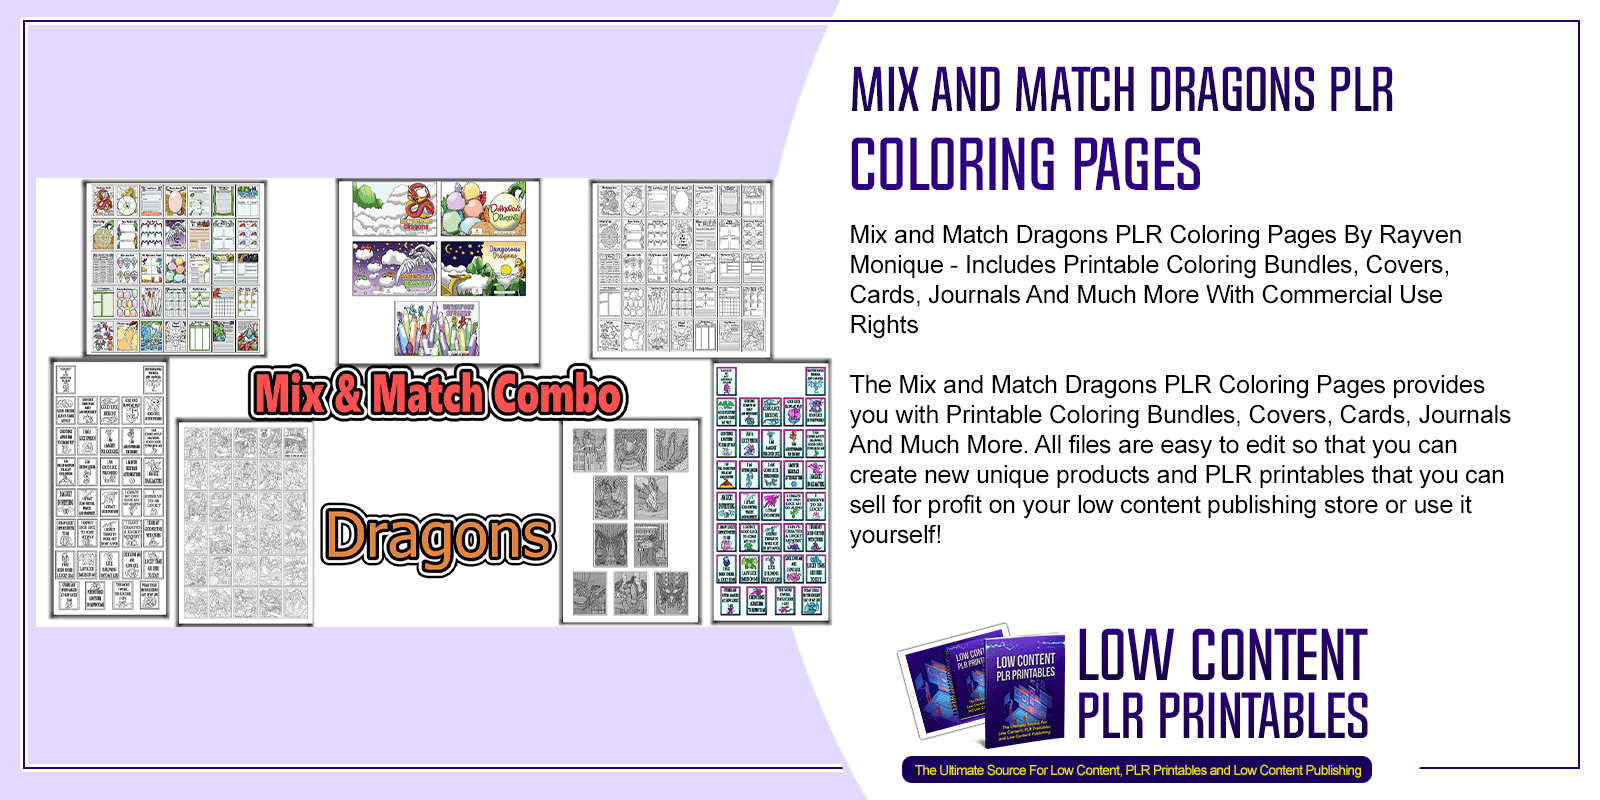 Mix and Match Dragons PLR Coloring Pages